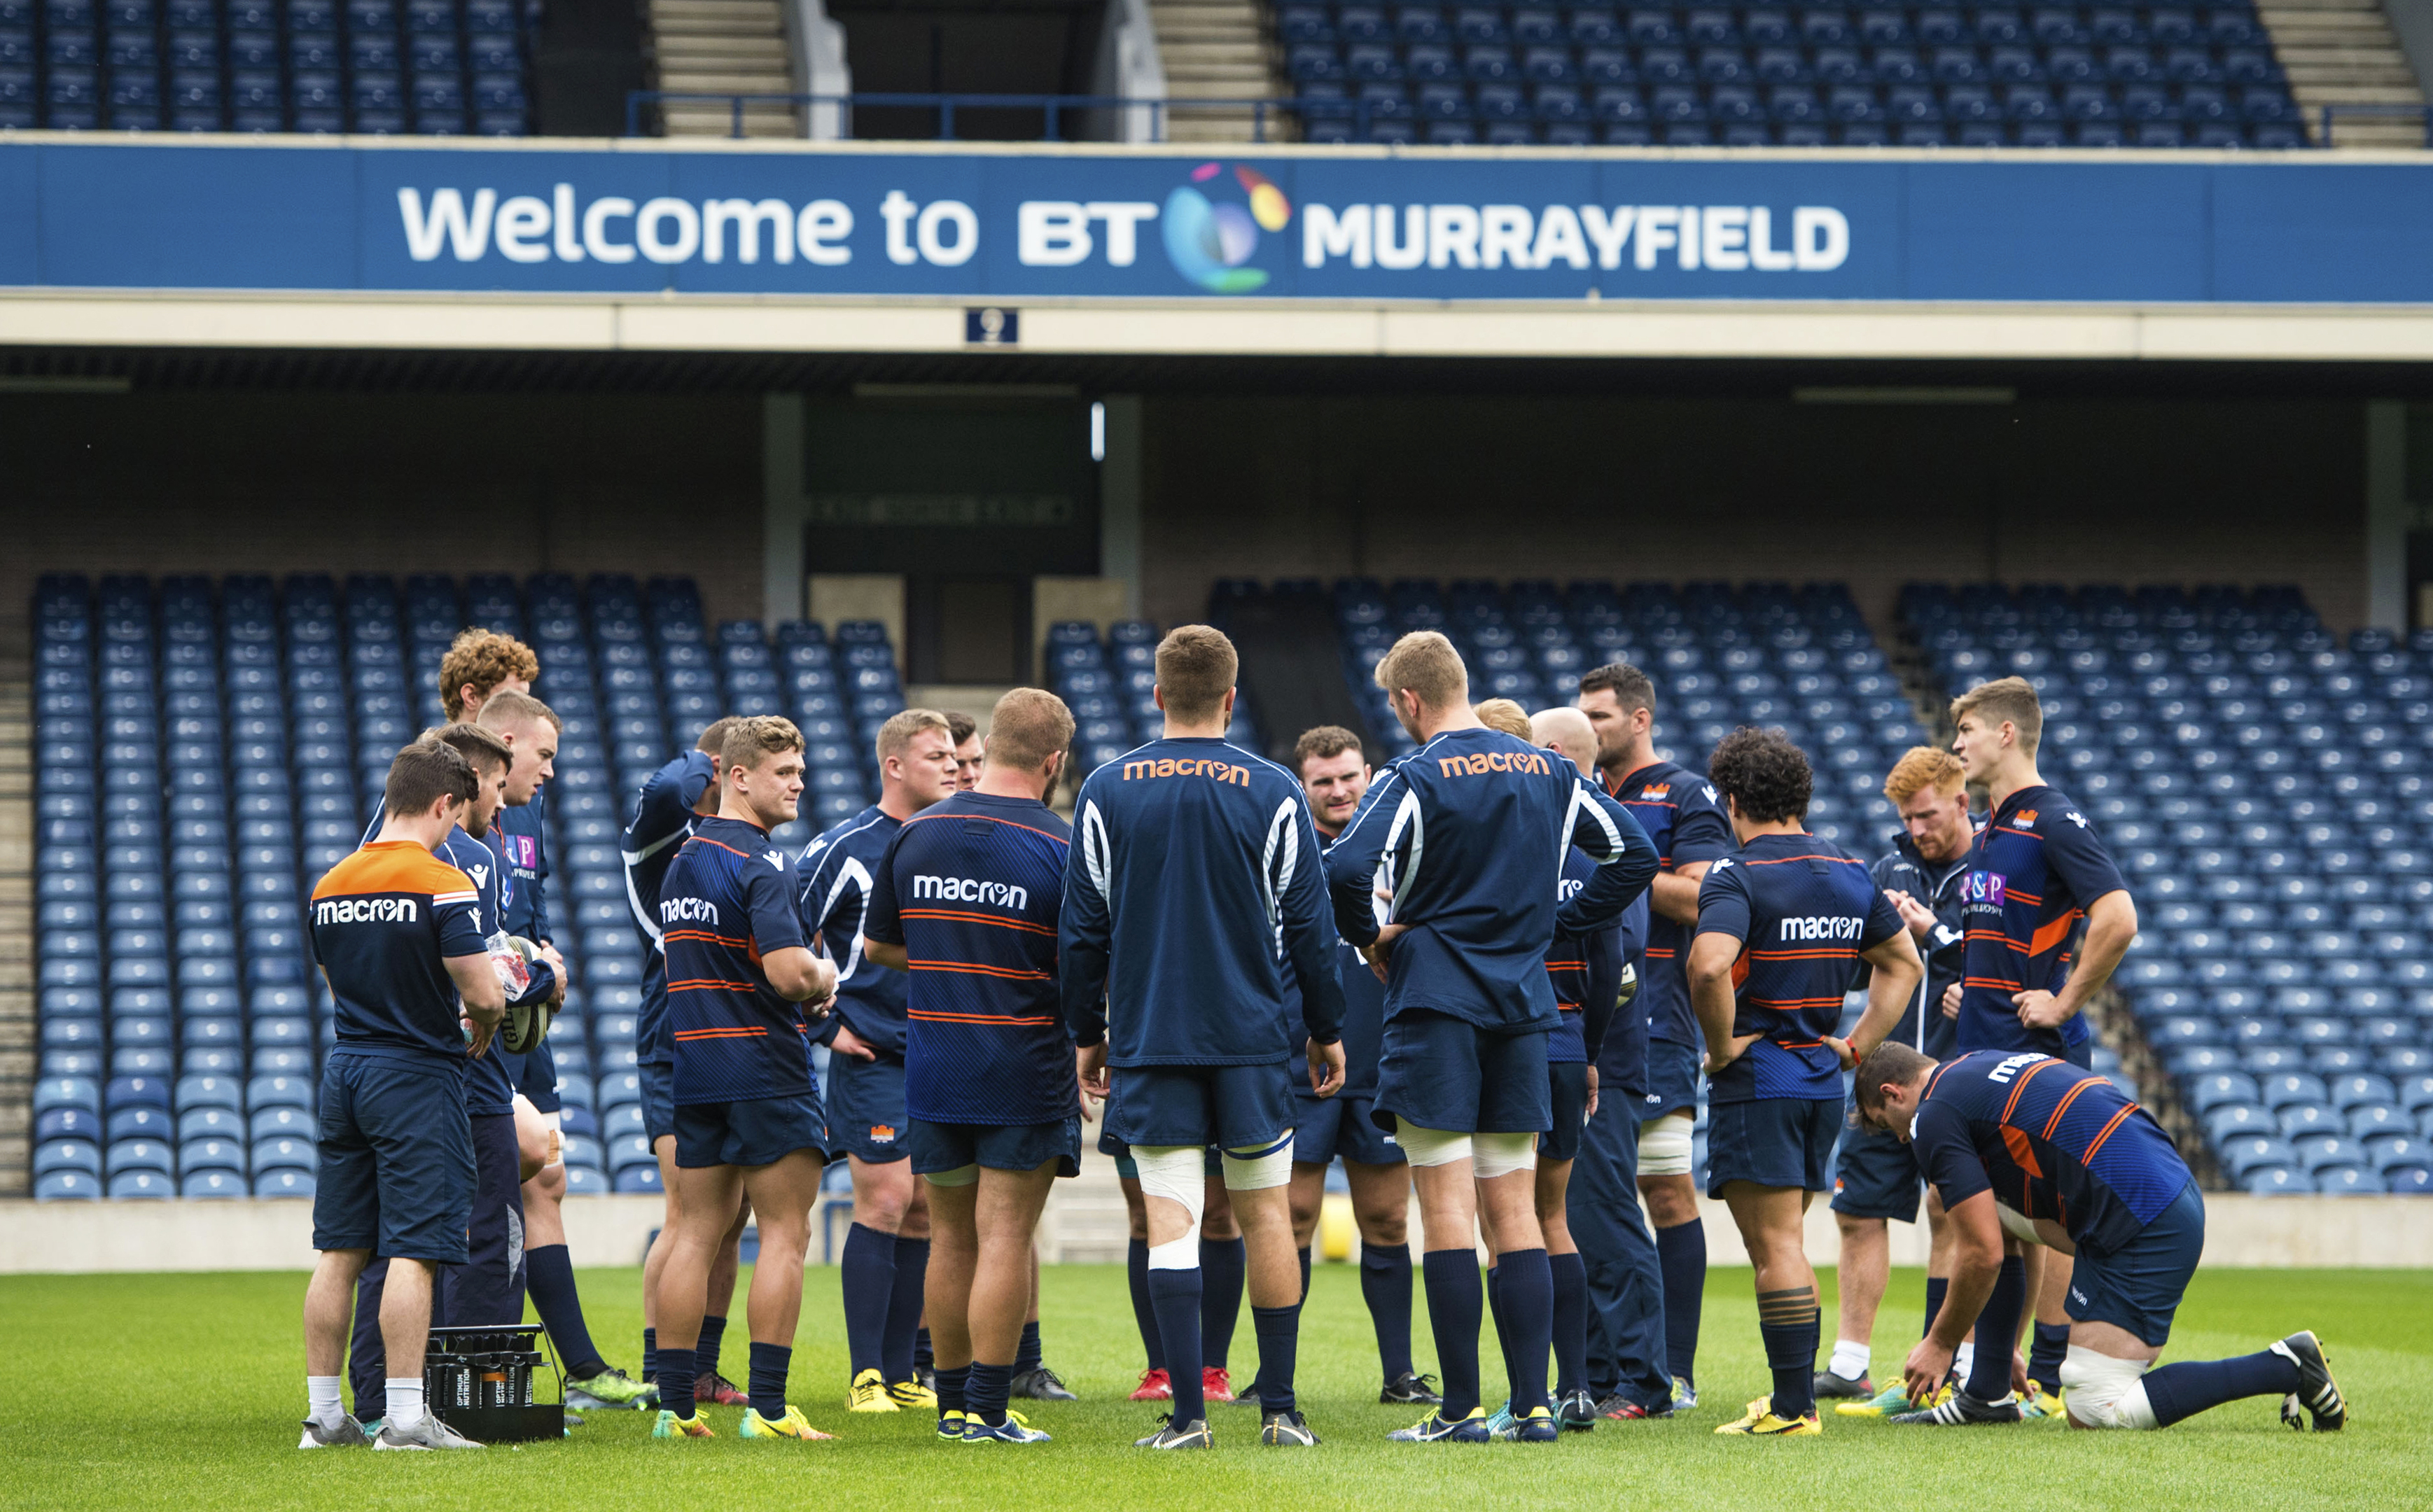 Edinburgh Rugby are at home at Murrayfield for the first time against Connacht.